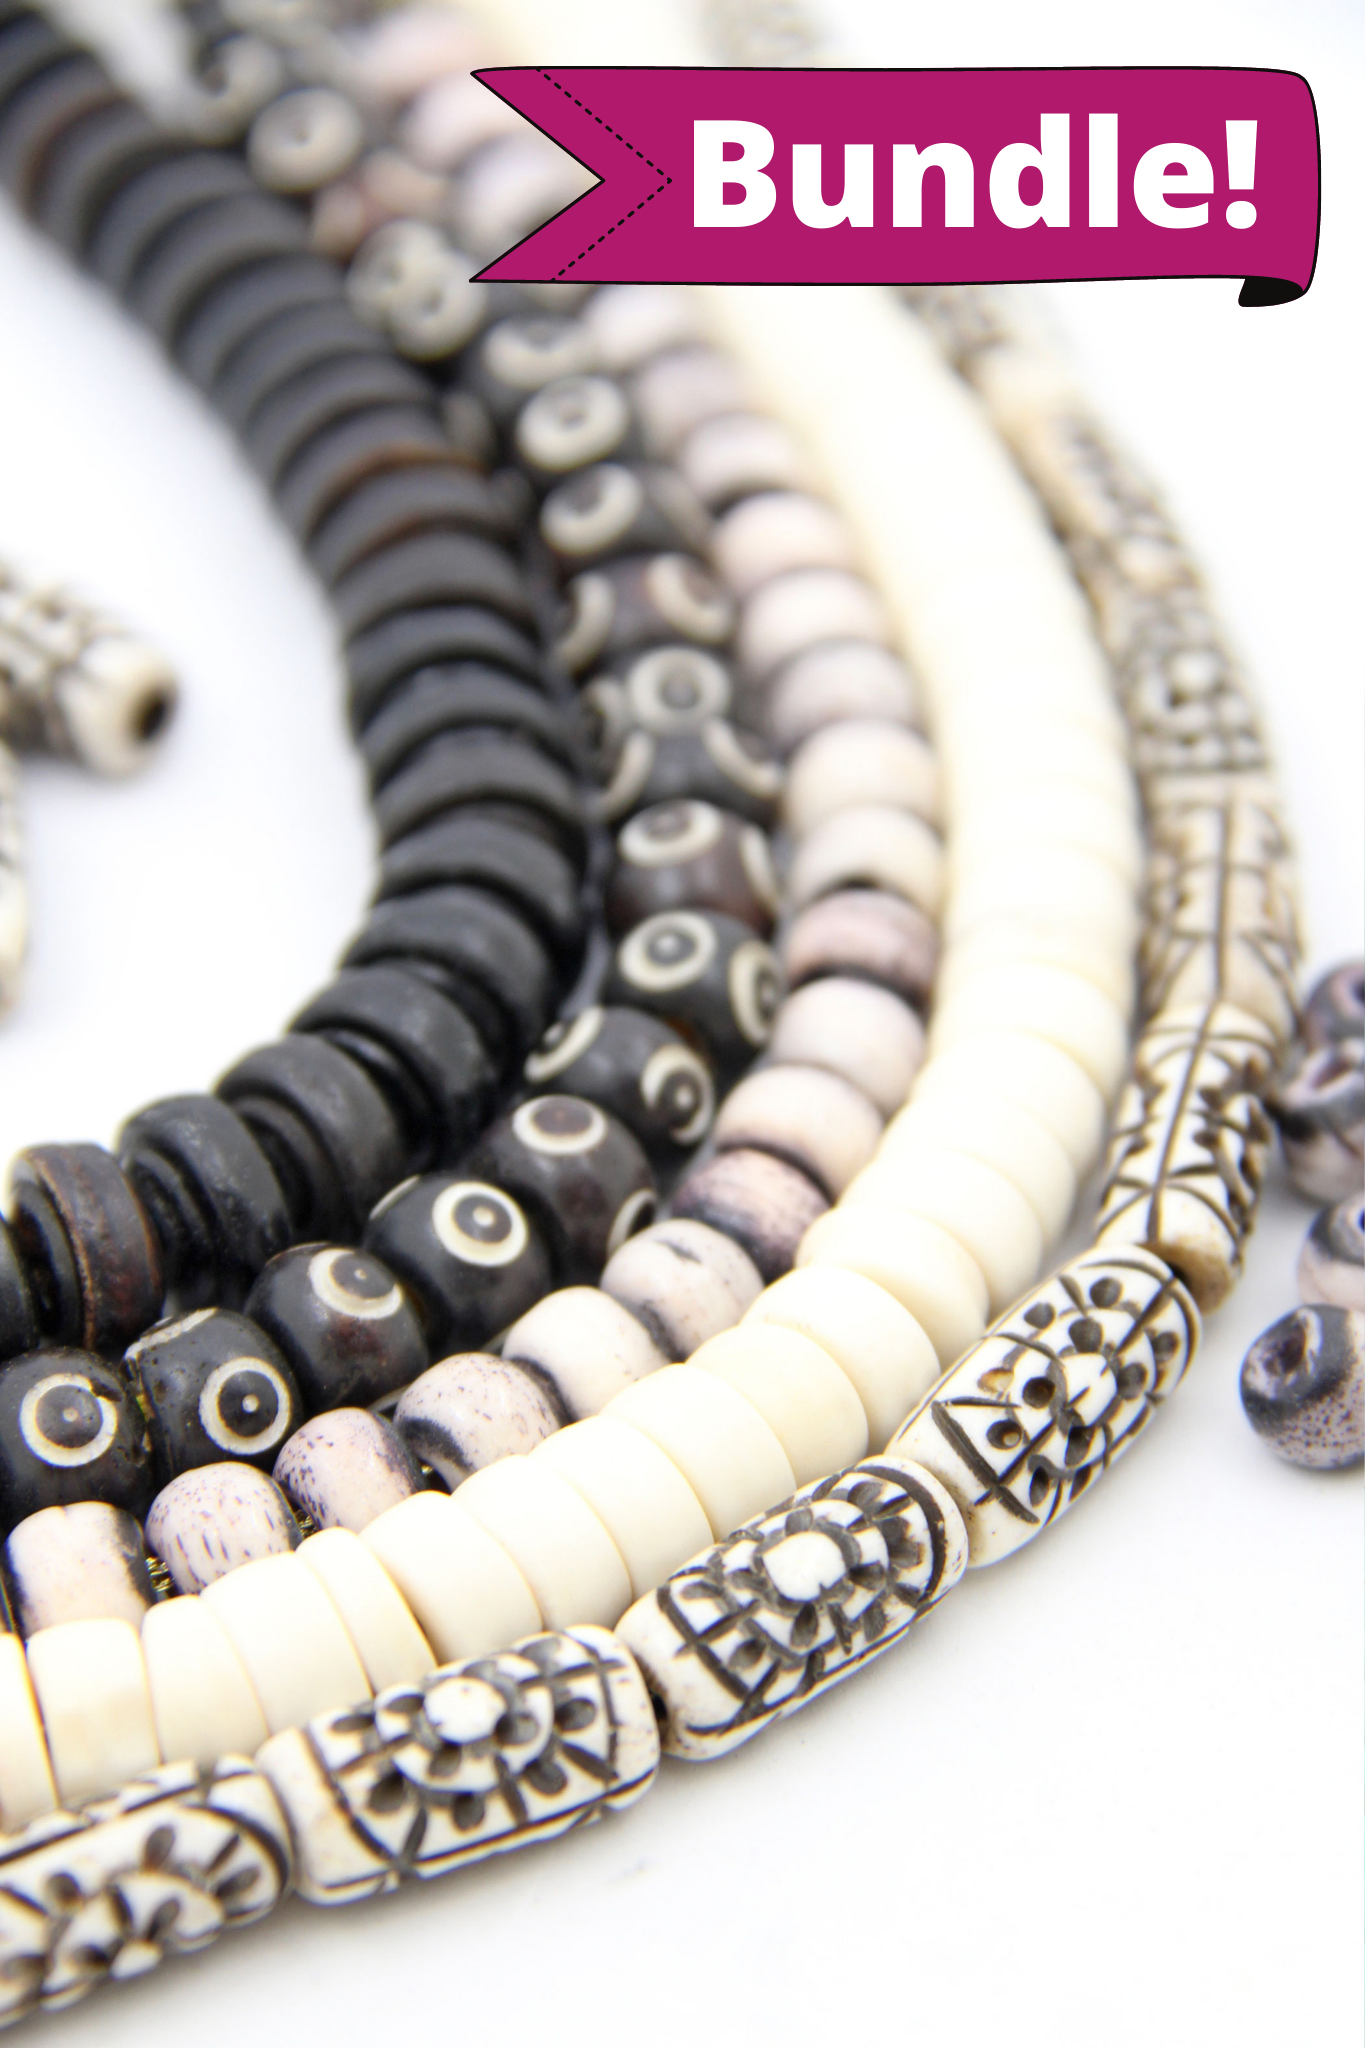 Bead Bundle: Handmade Rondelle Spacer Bone Beads, Black, Brown, White, Grey, 5 Strands, Assorted Shapes & Sizes